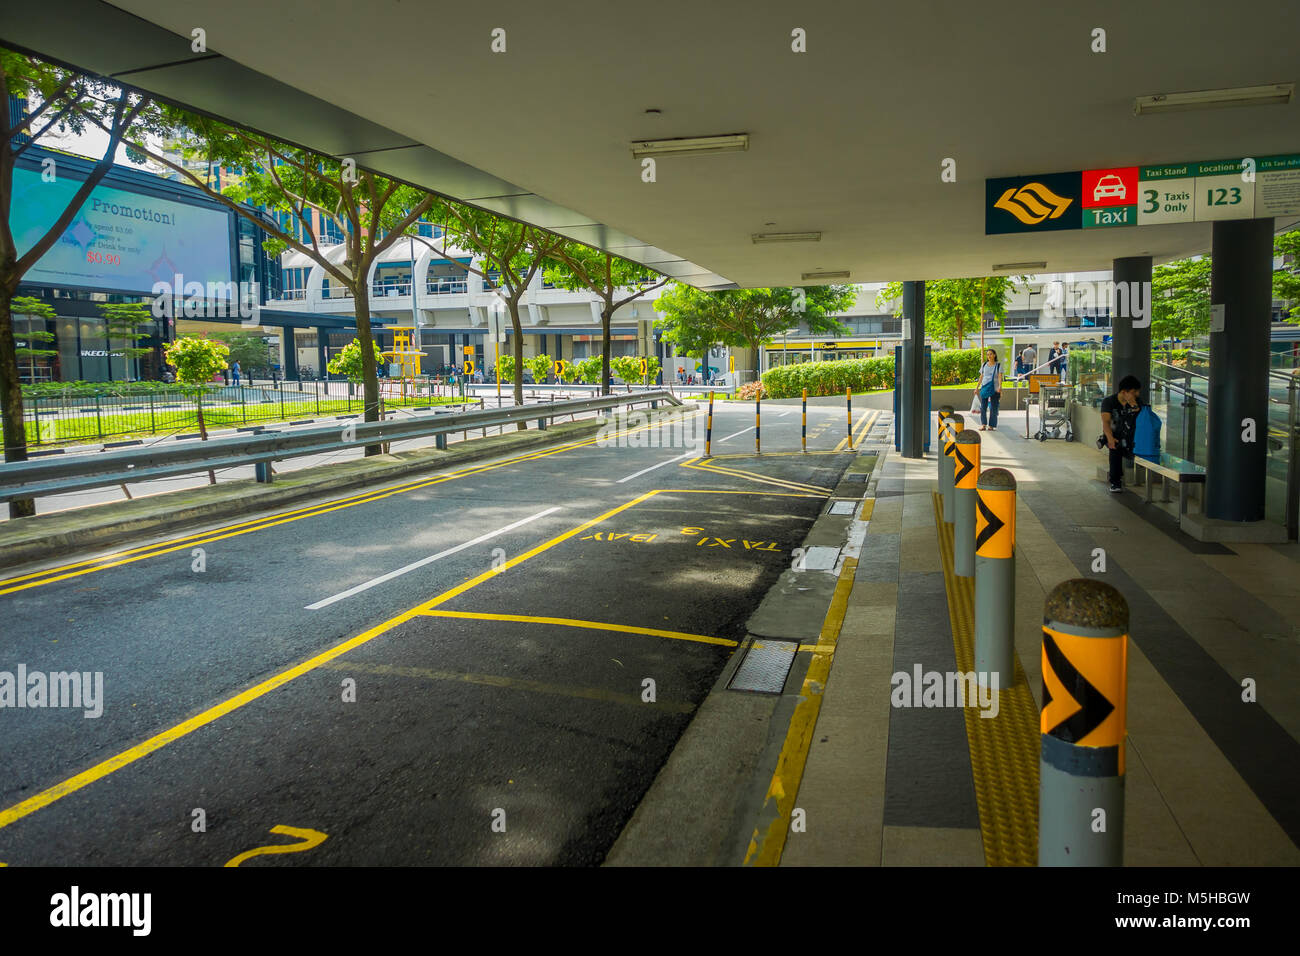 SINGAPORE, SINGAPORE - JANUARY 30, 2018: Outdoor view of parking area at outside of a building with some unidentified people walking in the sidewalks  Stock Photo